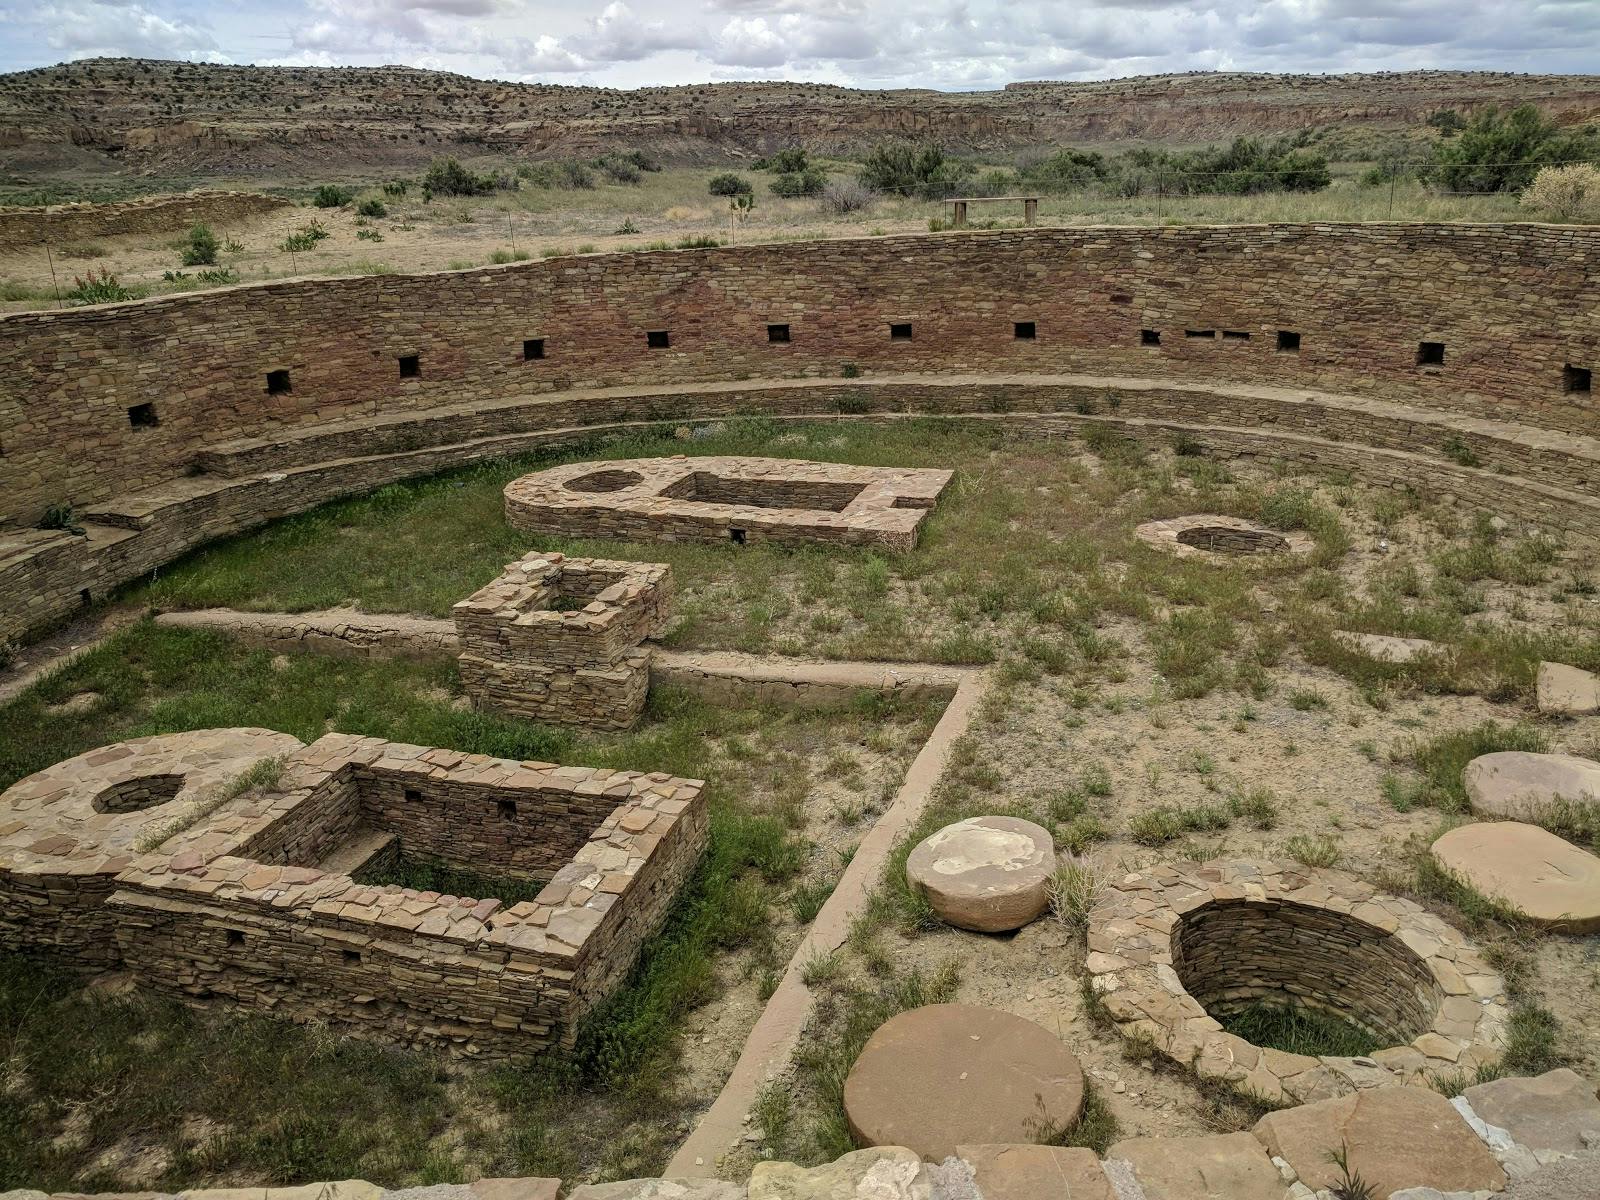 Image - Chaco Culture National Historical Park